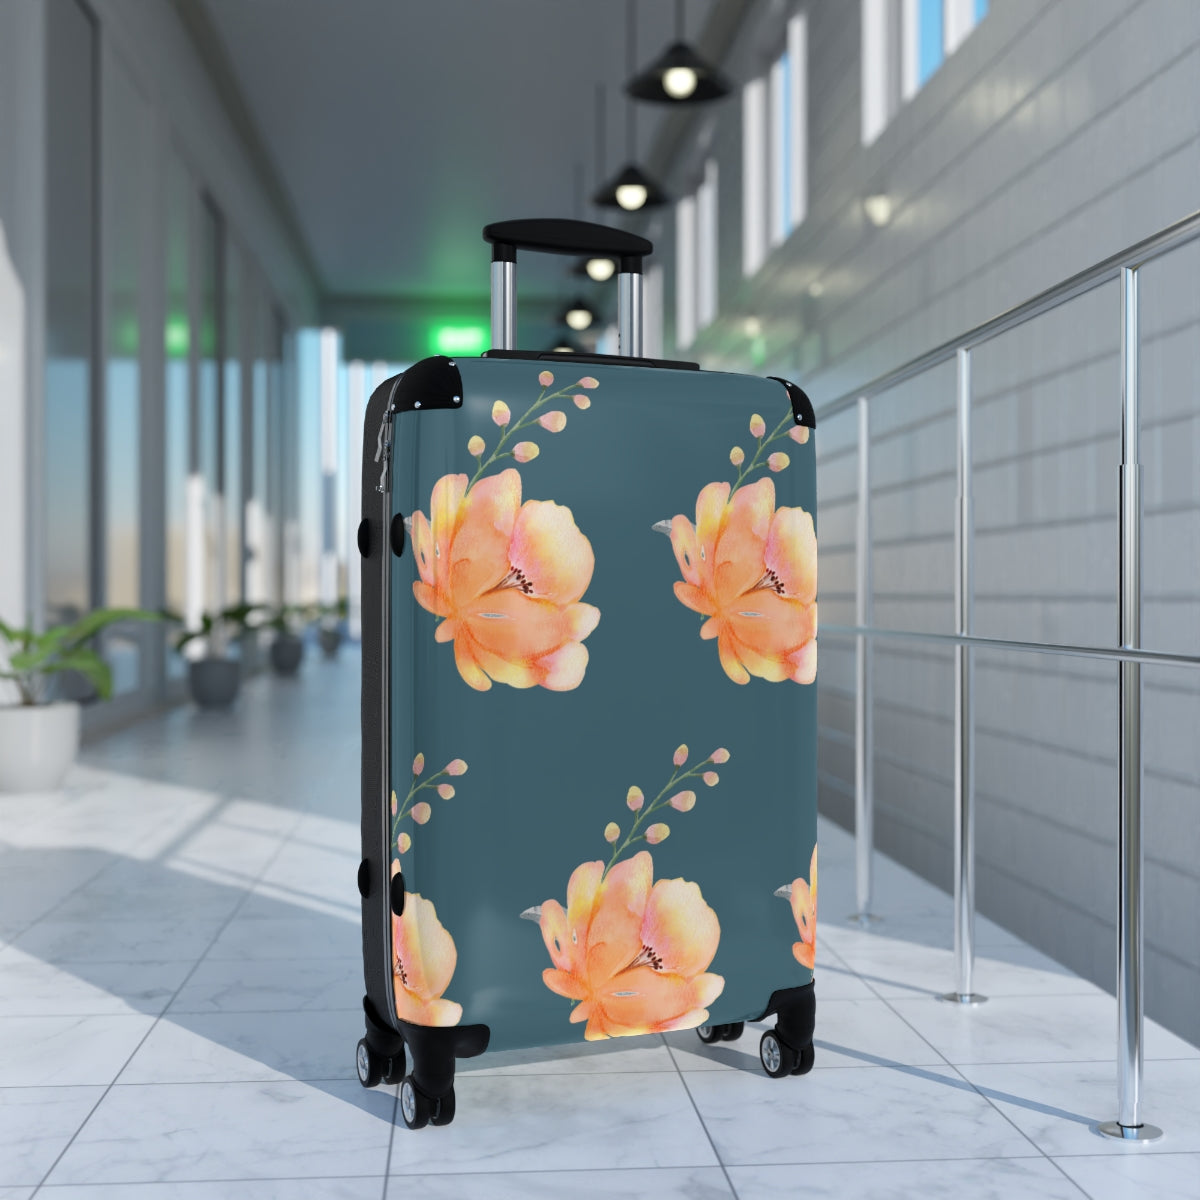 LUGGAGE FOR WOMEN, Floral Suitcases by Artzira, Cabin Suitcase, Carry-on Luggage, Trolly Travel Bags 4 Wheeled Spinners, Gift for her